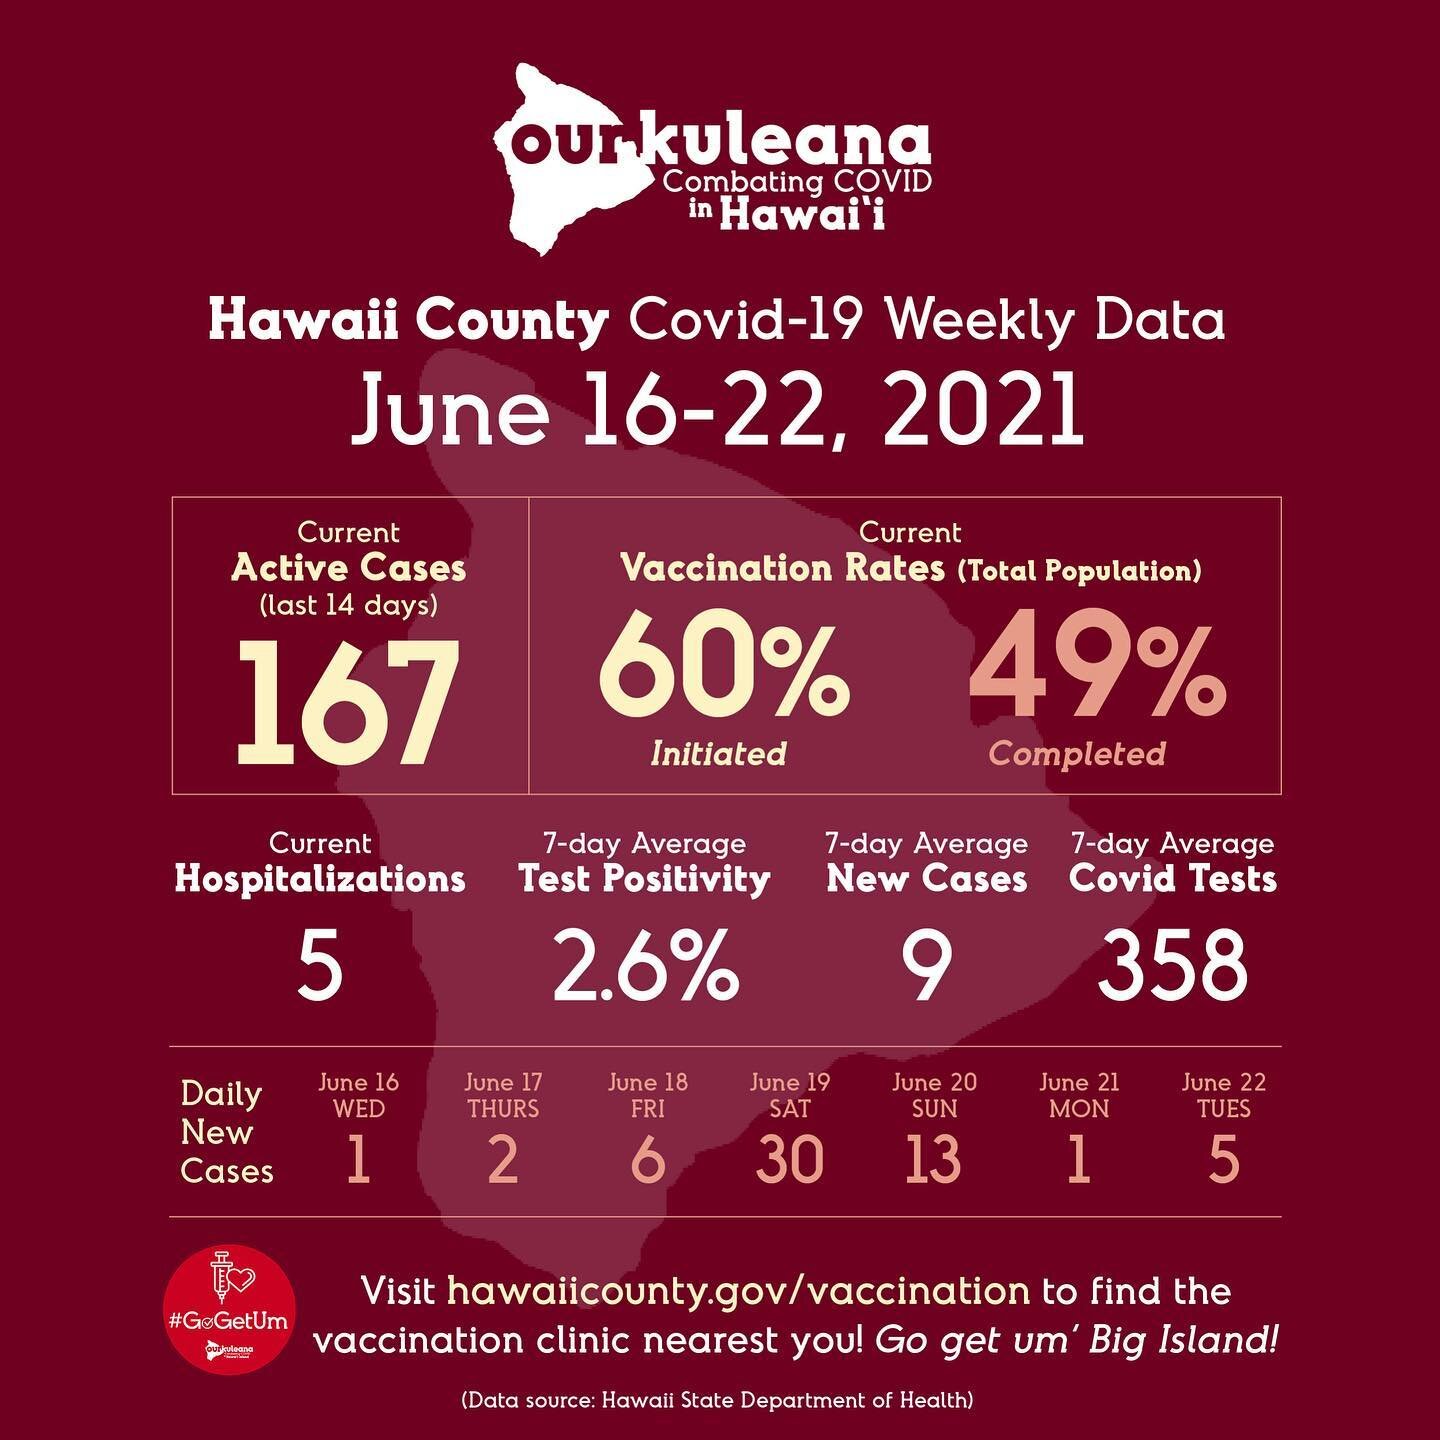 Hawaii County Covid-19 Weekly Data: June 16-22, 2021

According to the Hawaii State Department of Health, we currently have 167 active cases on Hawaii Island with 5 people hospitalized. 

Of our total population for Hawaii County, 49% have completed 